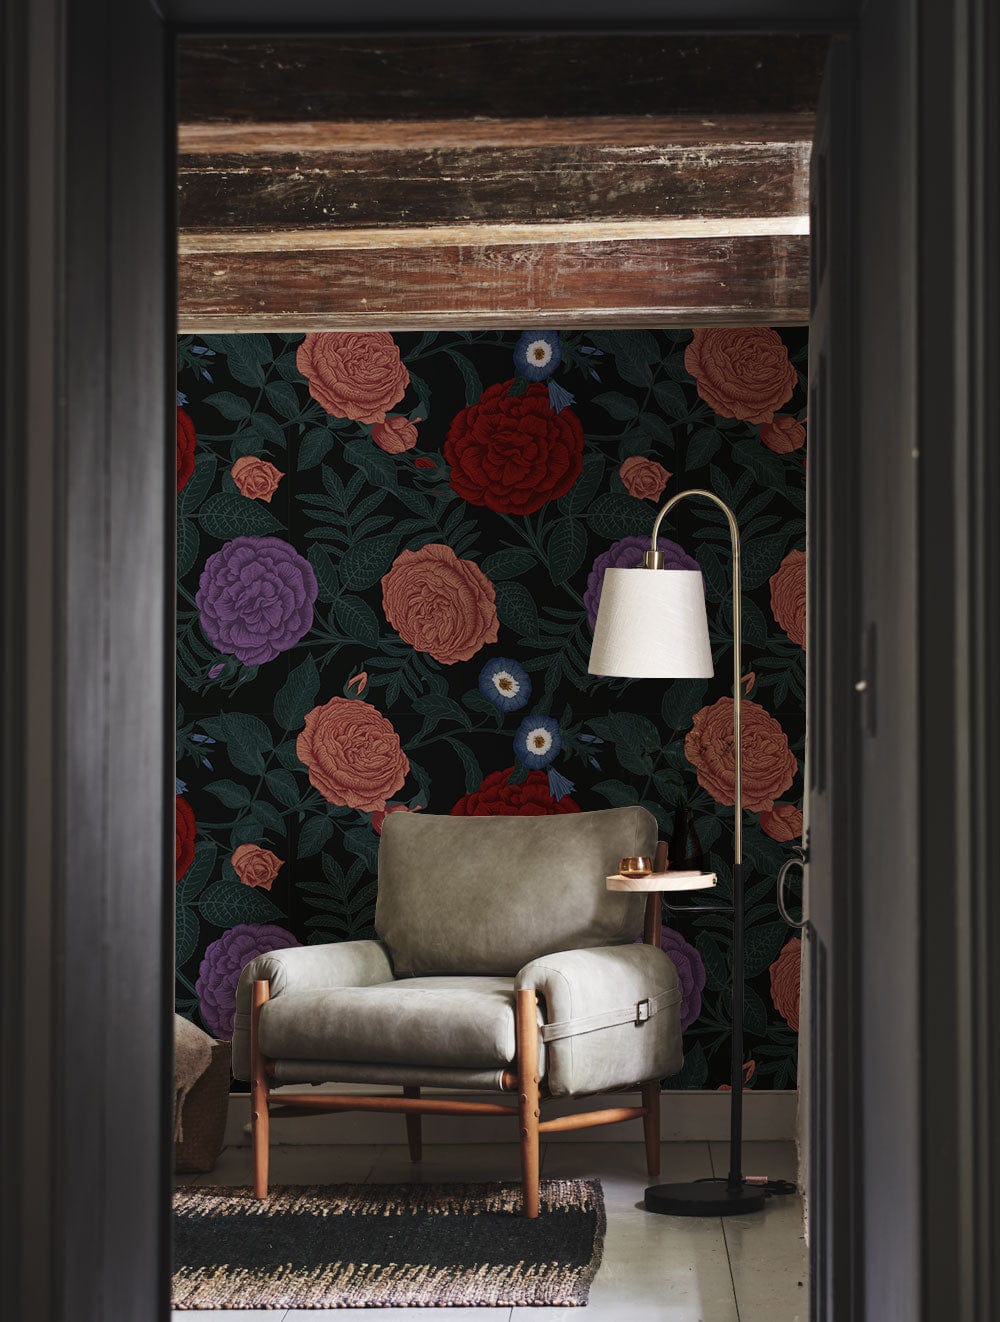 Wallpaper mural with a dark and colorful bouquet of blossoms for the hallway's decor.